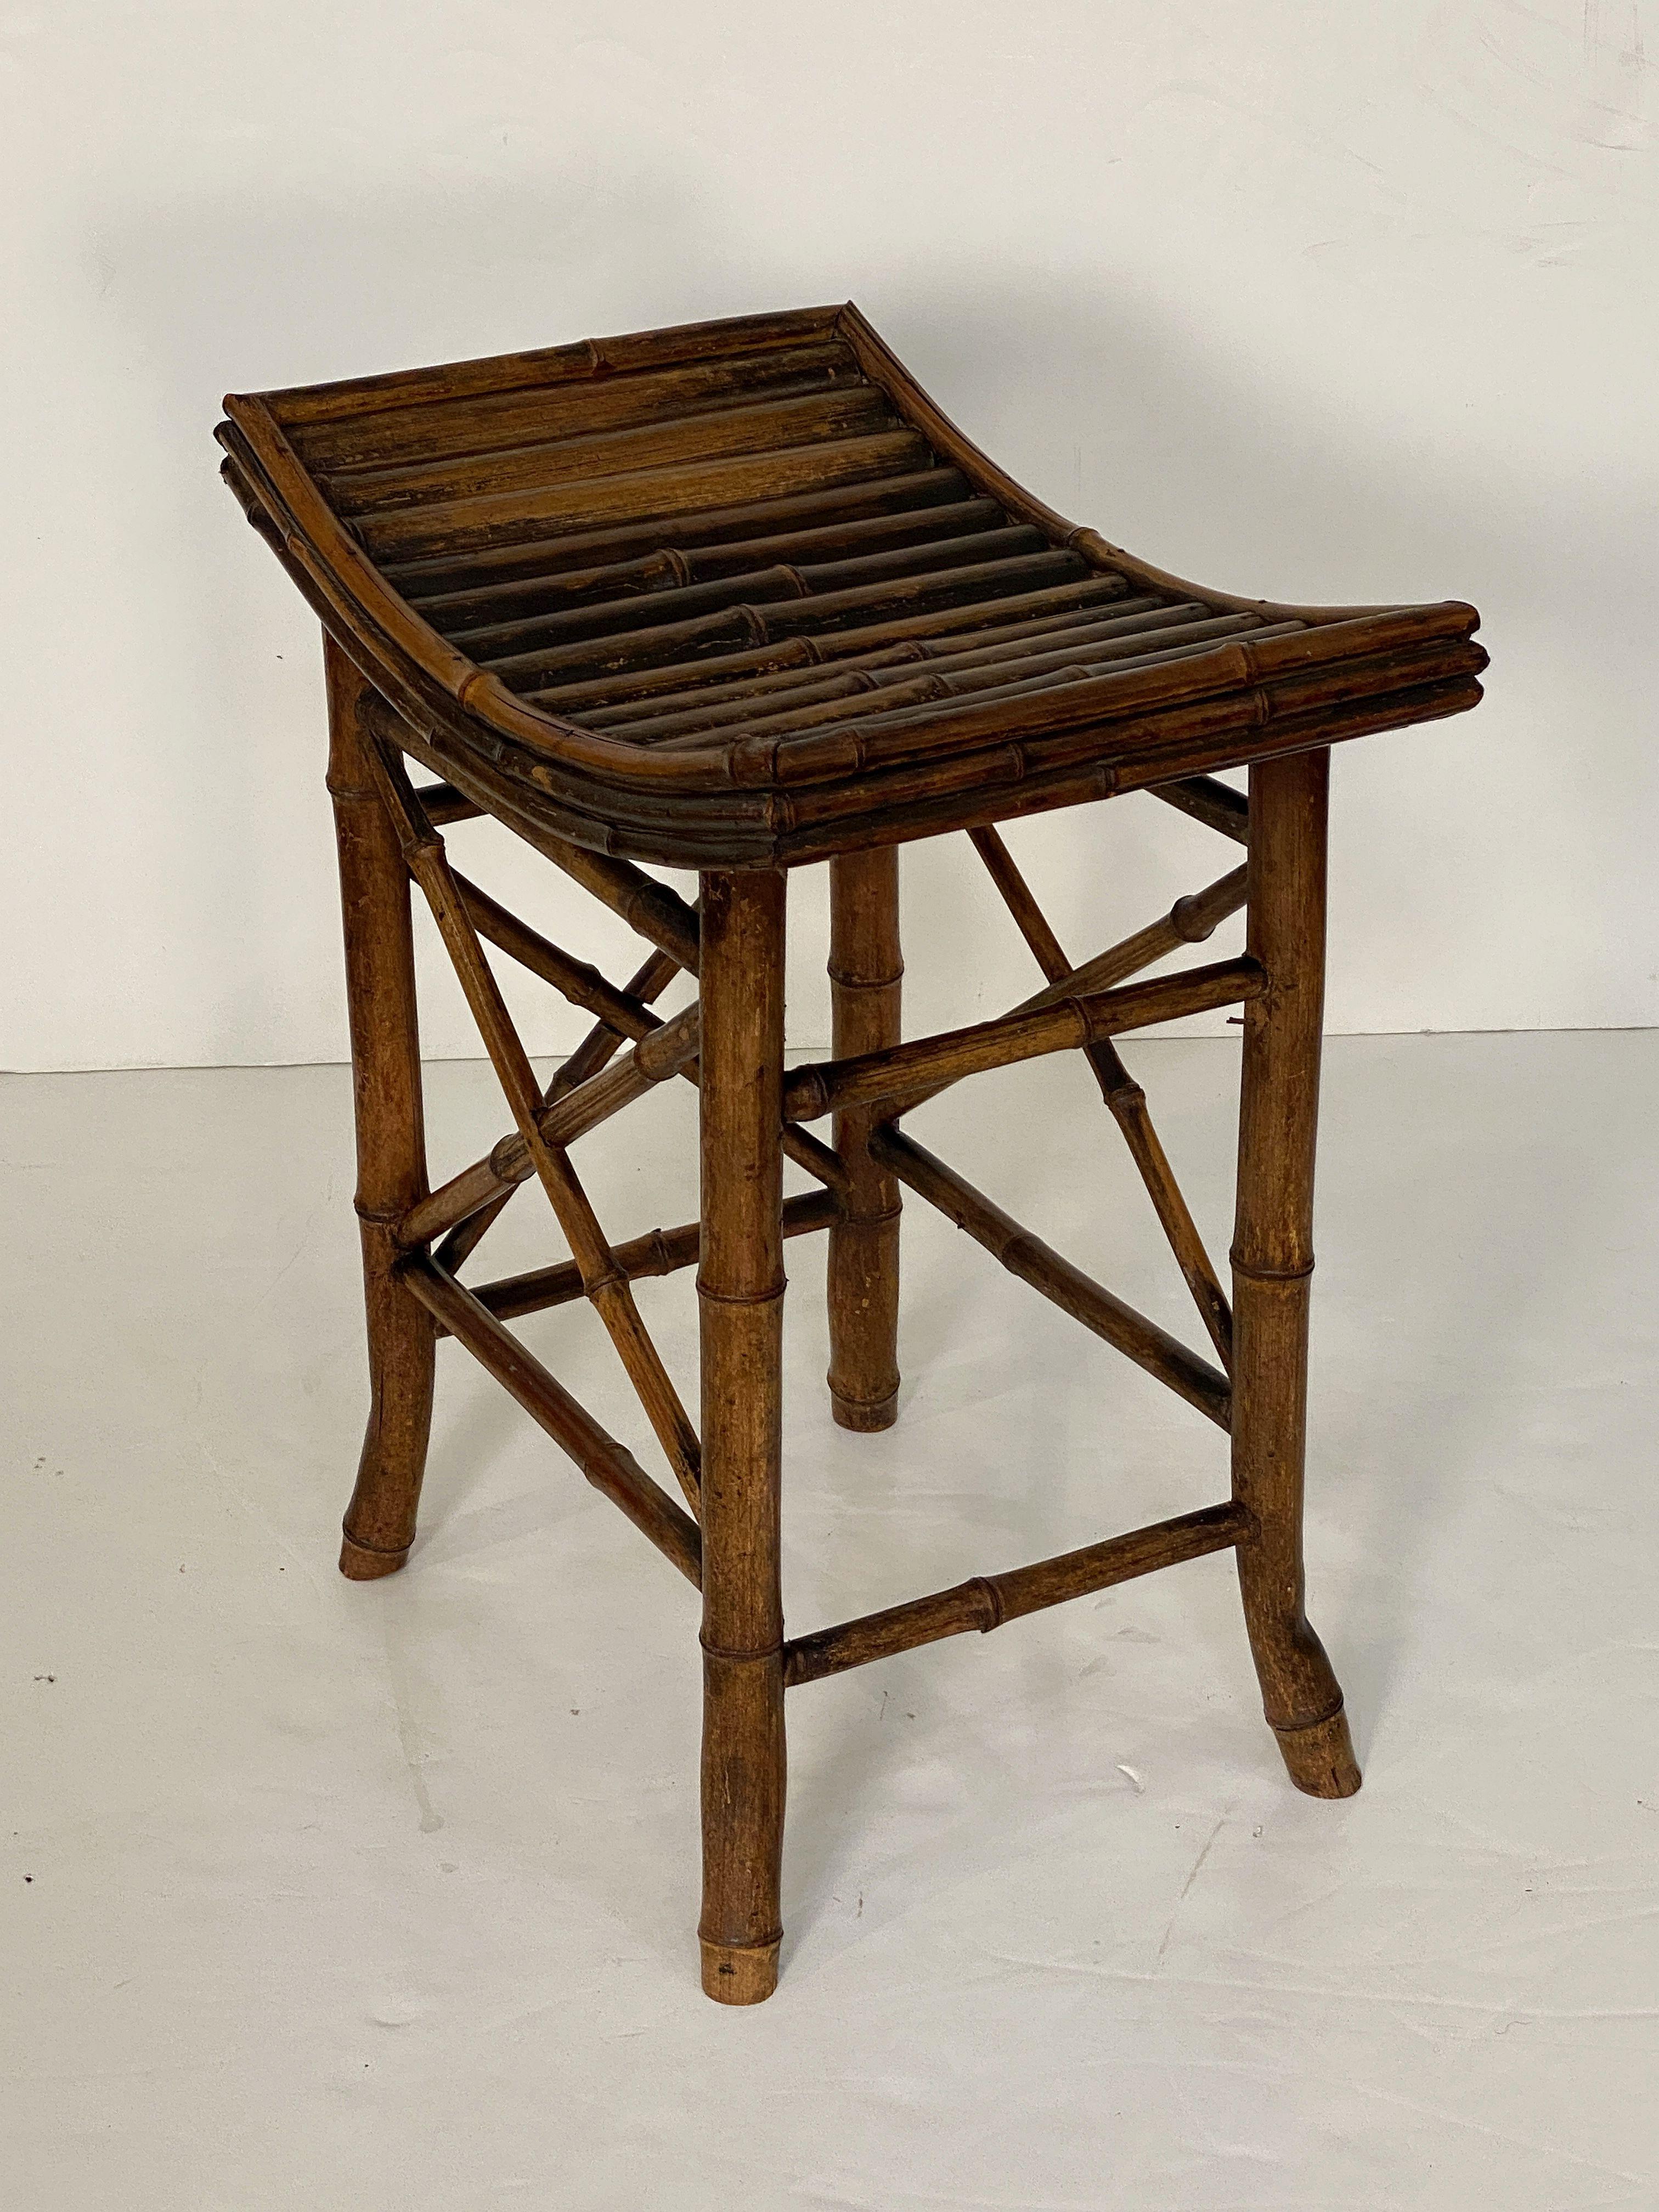 English Bamboo Bench or Stool with Saddle Seat from the Aesthetic Movement Era For Sale 1